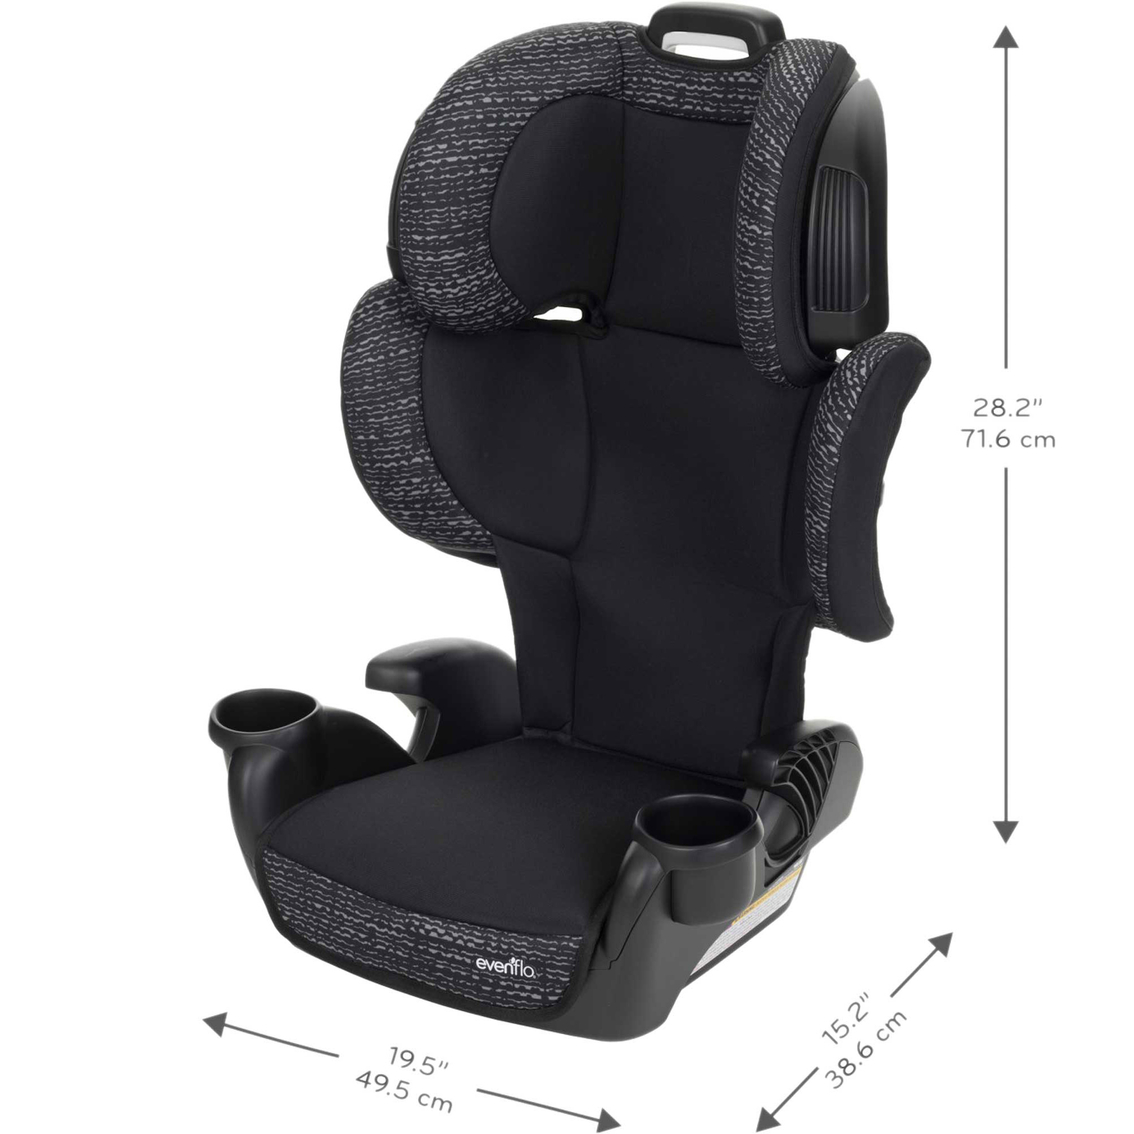 Evenflo GoTime LX Booster Seat - Image 10 of 10